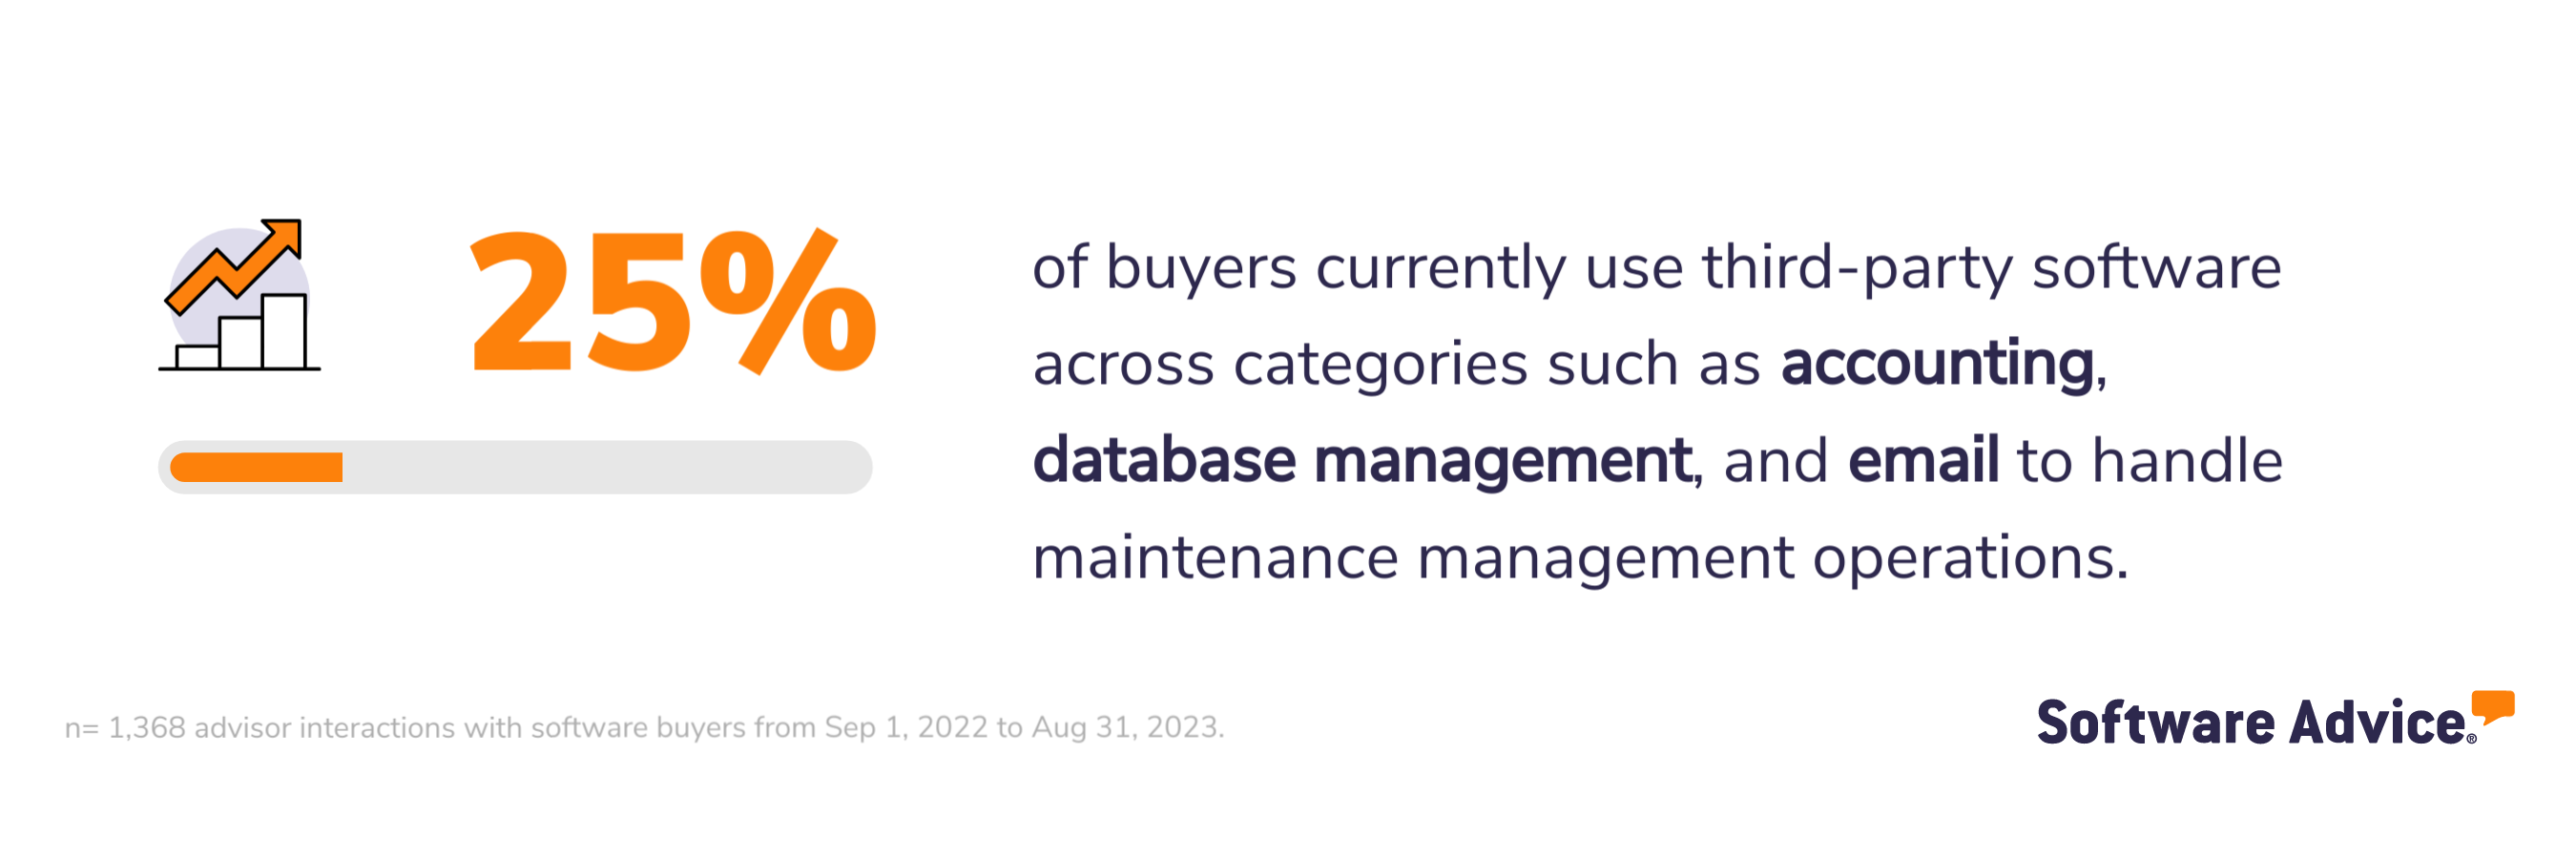 SA graphic: 25% of buyers currently use third-party software across categories like accounting, database management, and email to handle CMMS operations